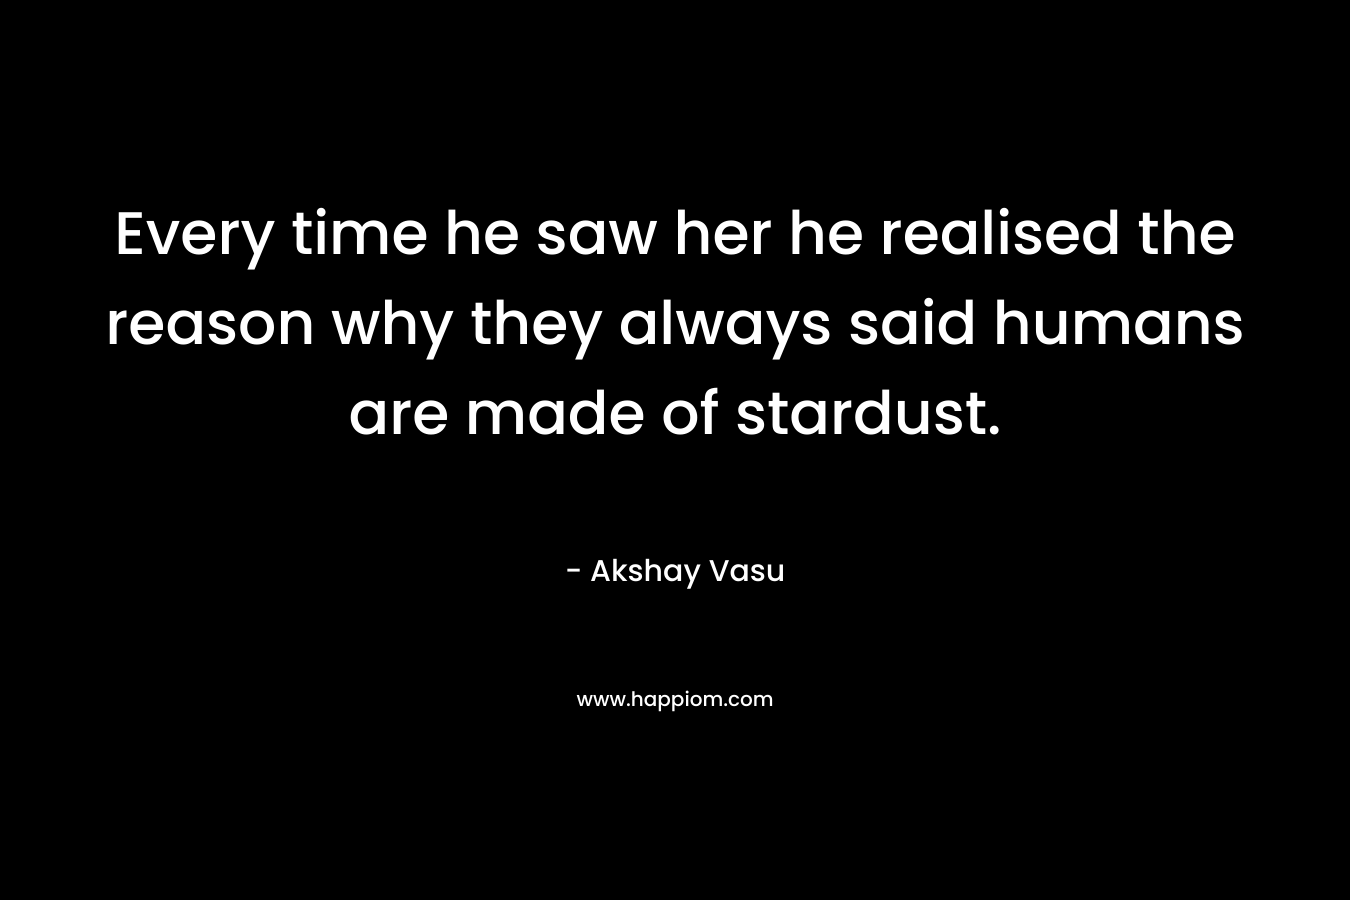 Every time he saw her he realised the reason why they always said humans are made of stardust.